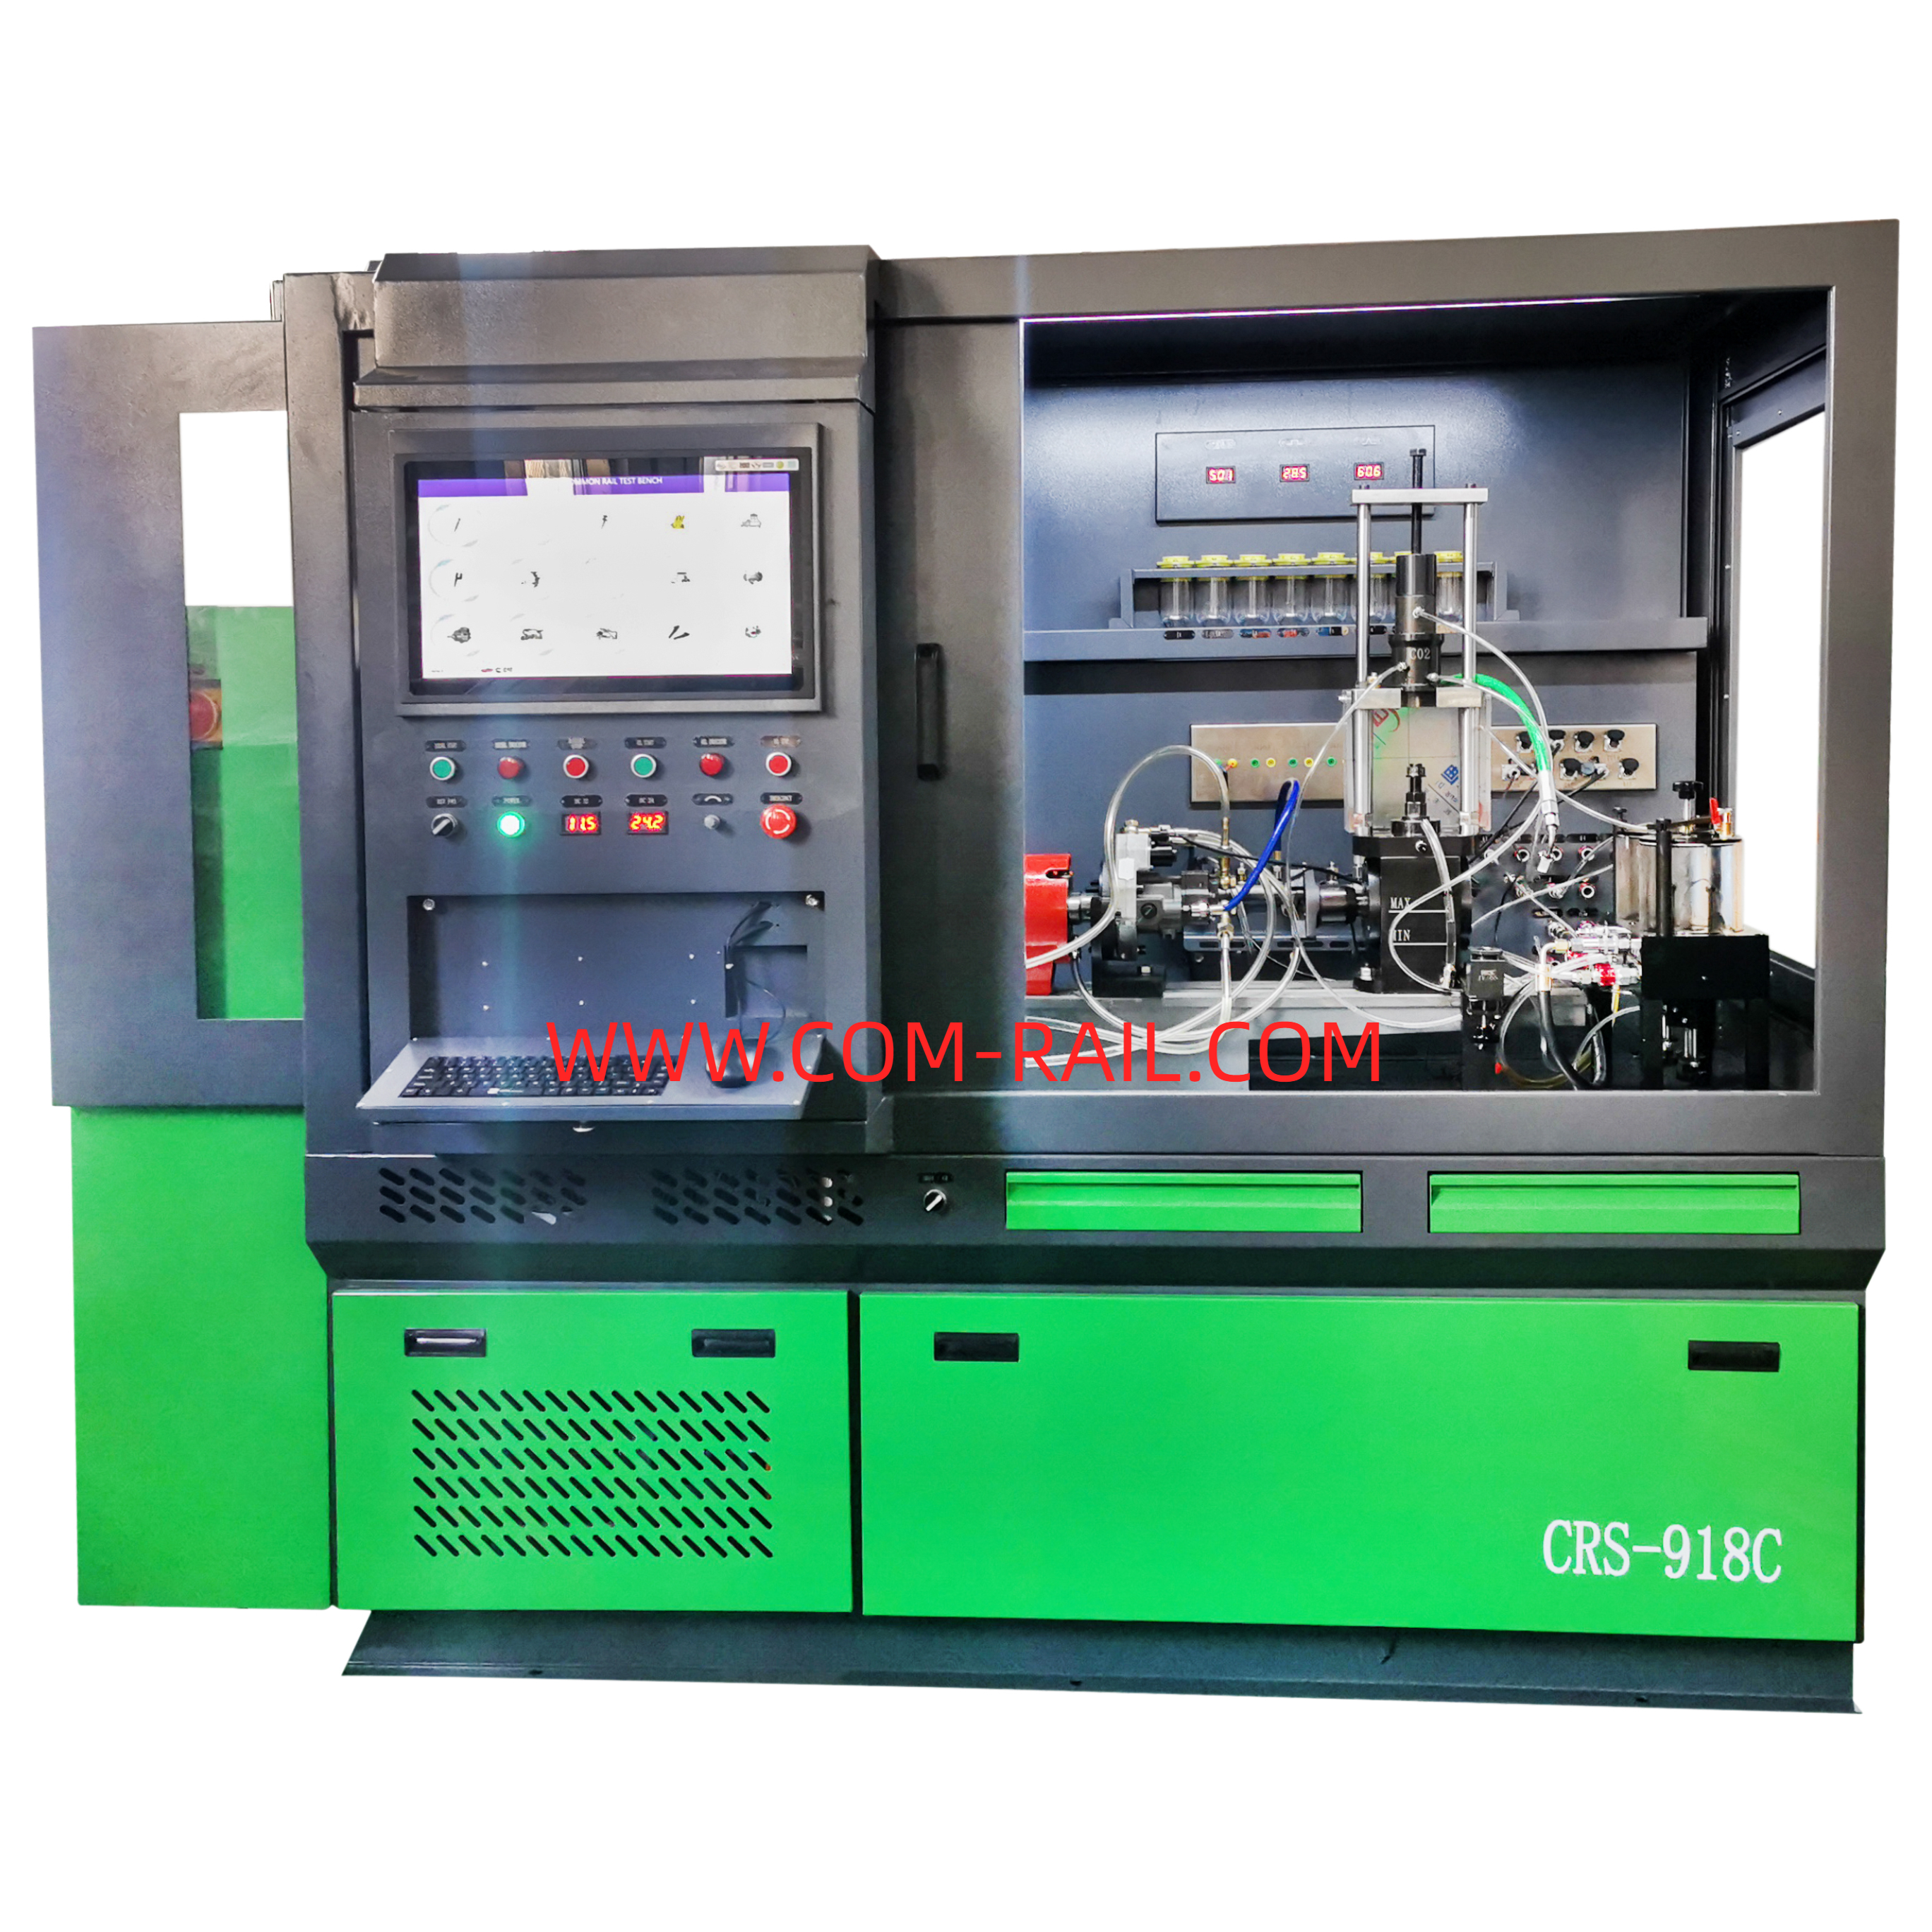 Newest multiple function common rail test bench CRS-918C